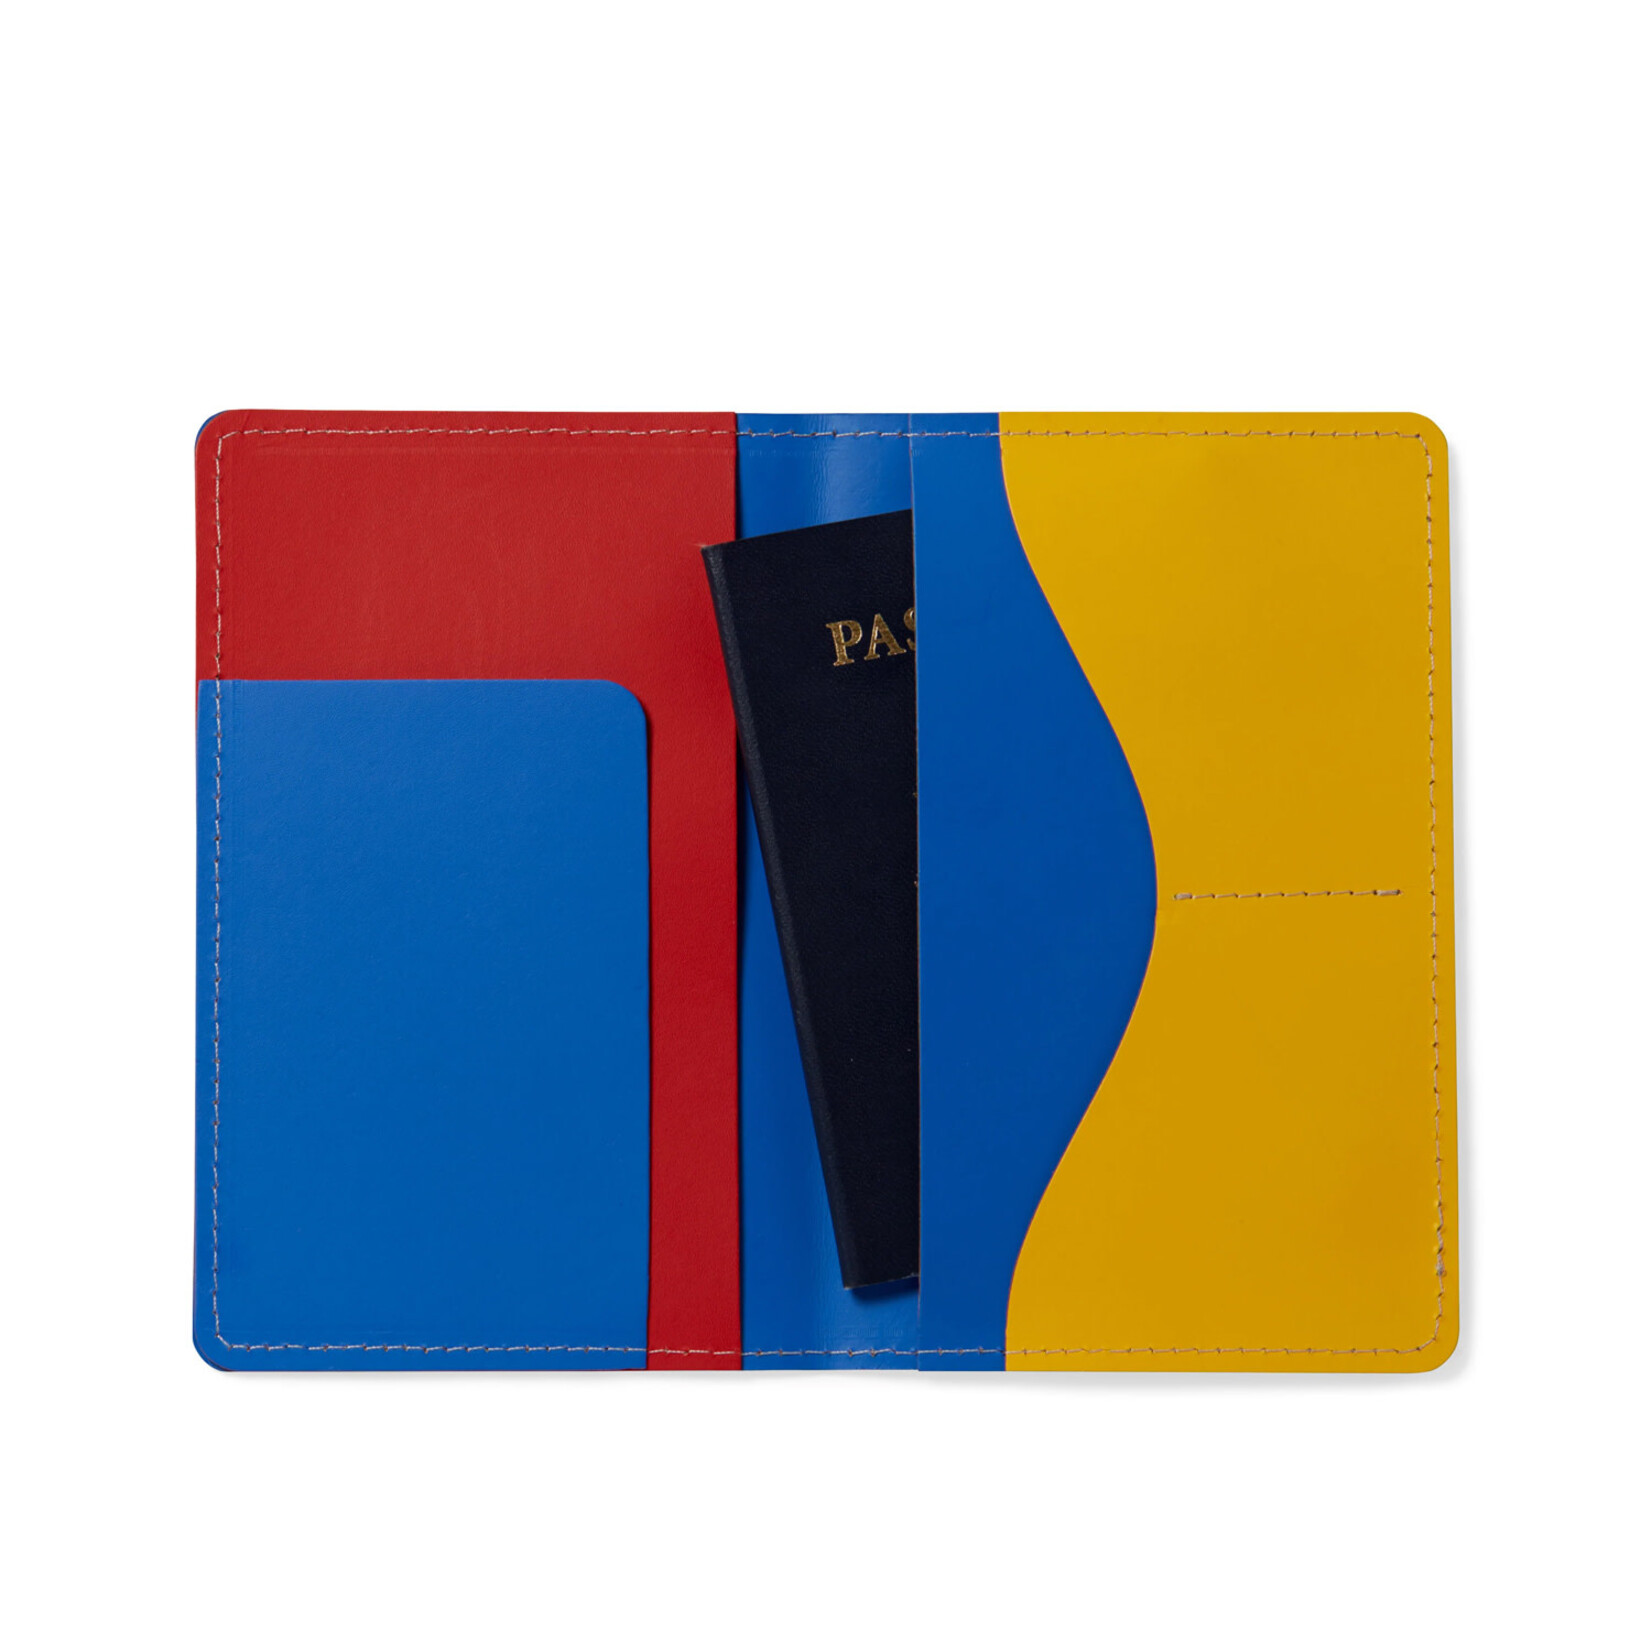 MoMA MoMA Recycled Leather Passport Holder, RBY